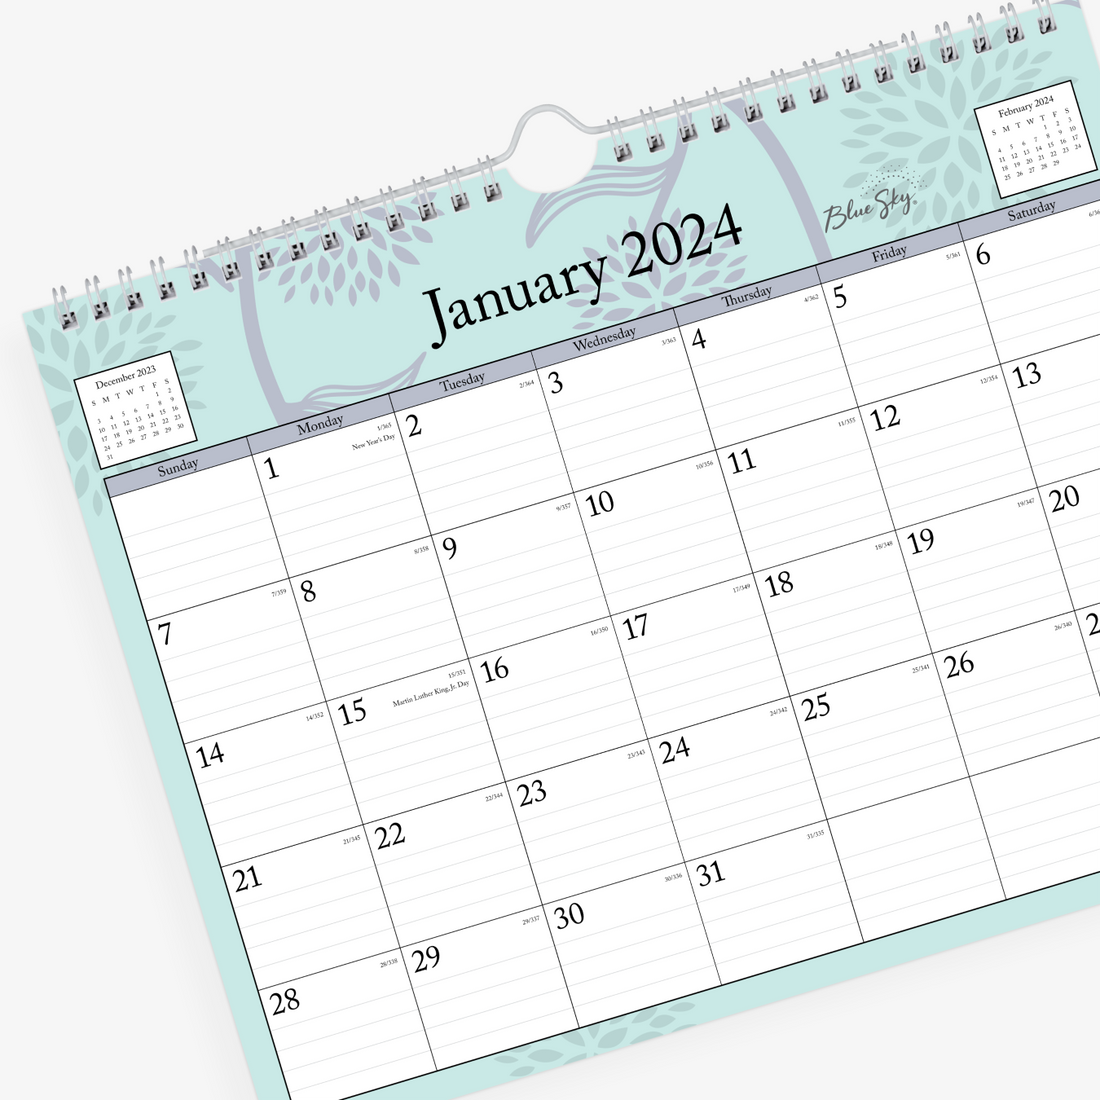 January 2024 - December 2024 monthly wall calendar in 11 x 8.75 size